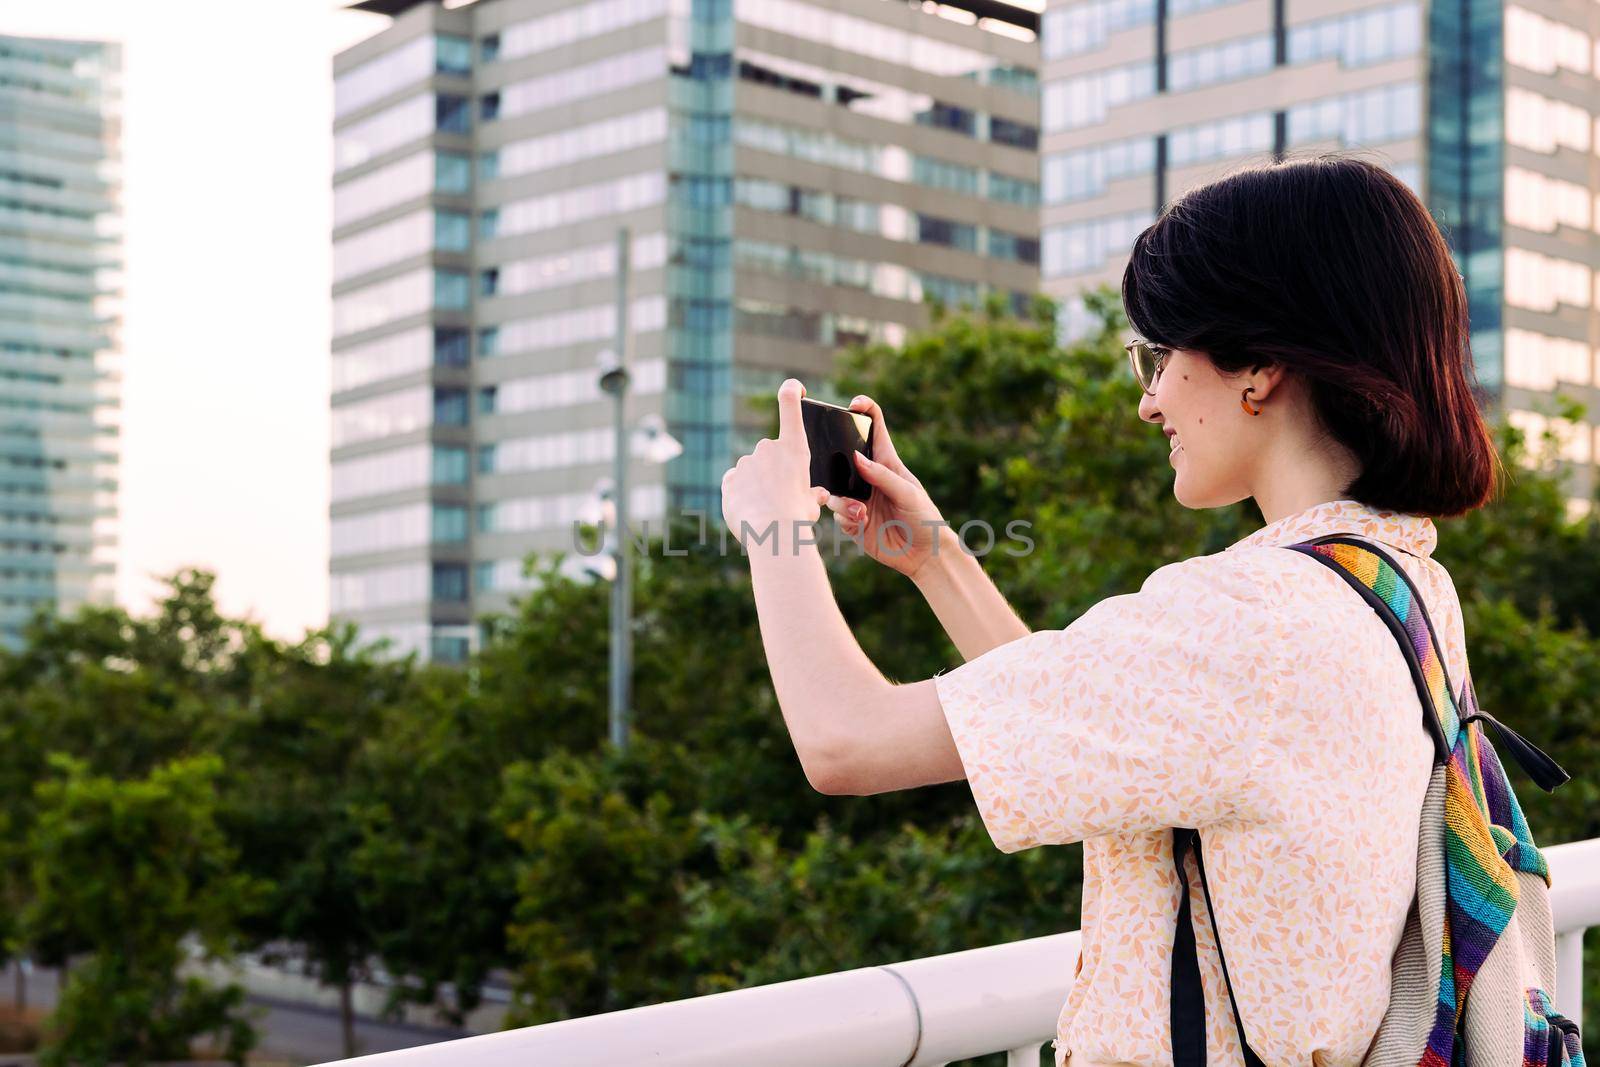 rear view of a young tourist woman taking a photo with the phone, concept of social media and traveler lifestyle, copy space for text